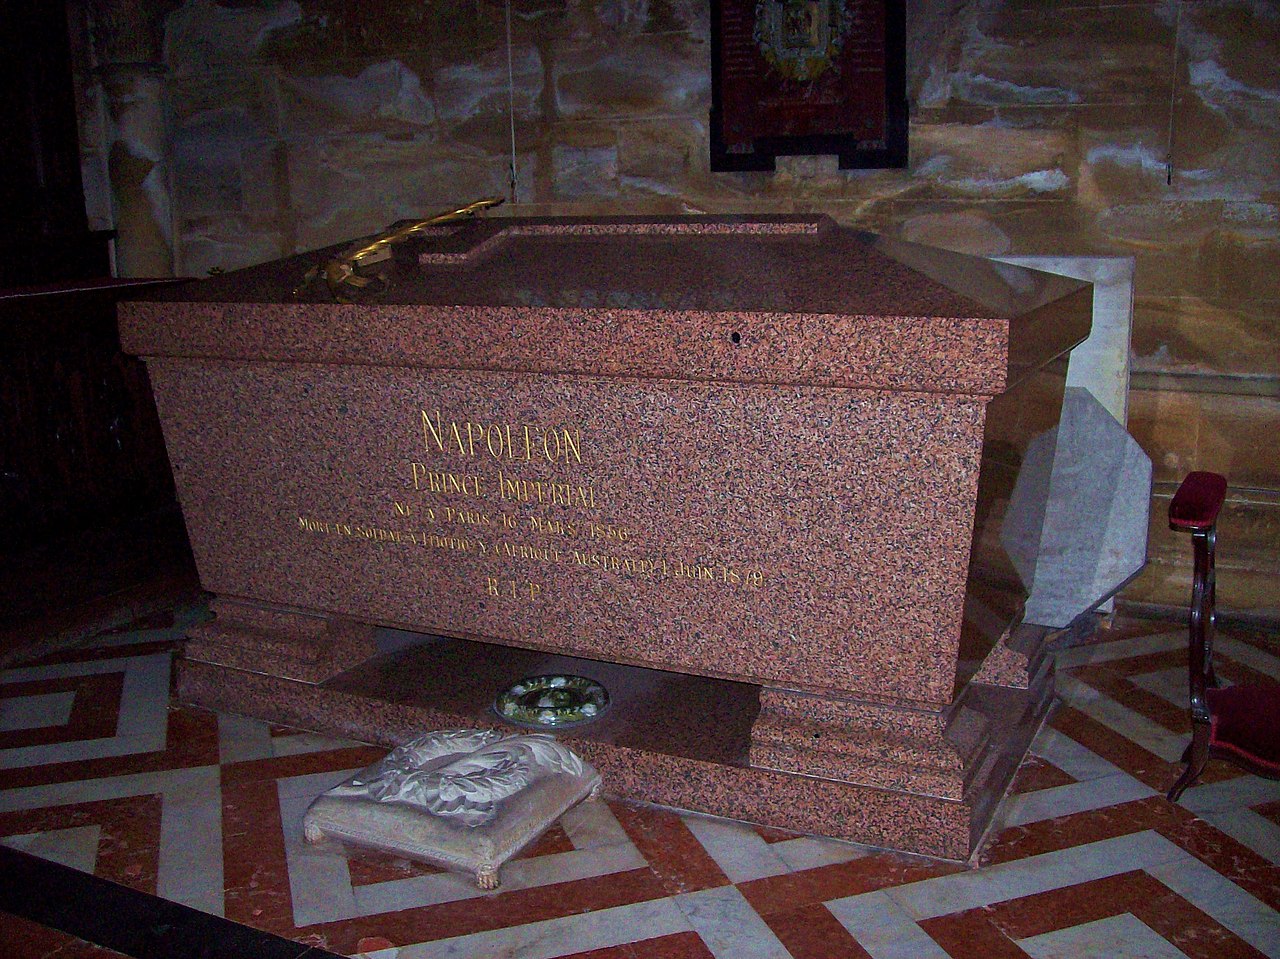 File:Sarcophagus of Napoleon, Prince Imperial (geograph 3835254).jpg -  Wikipedia